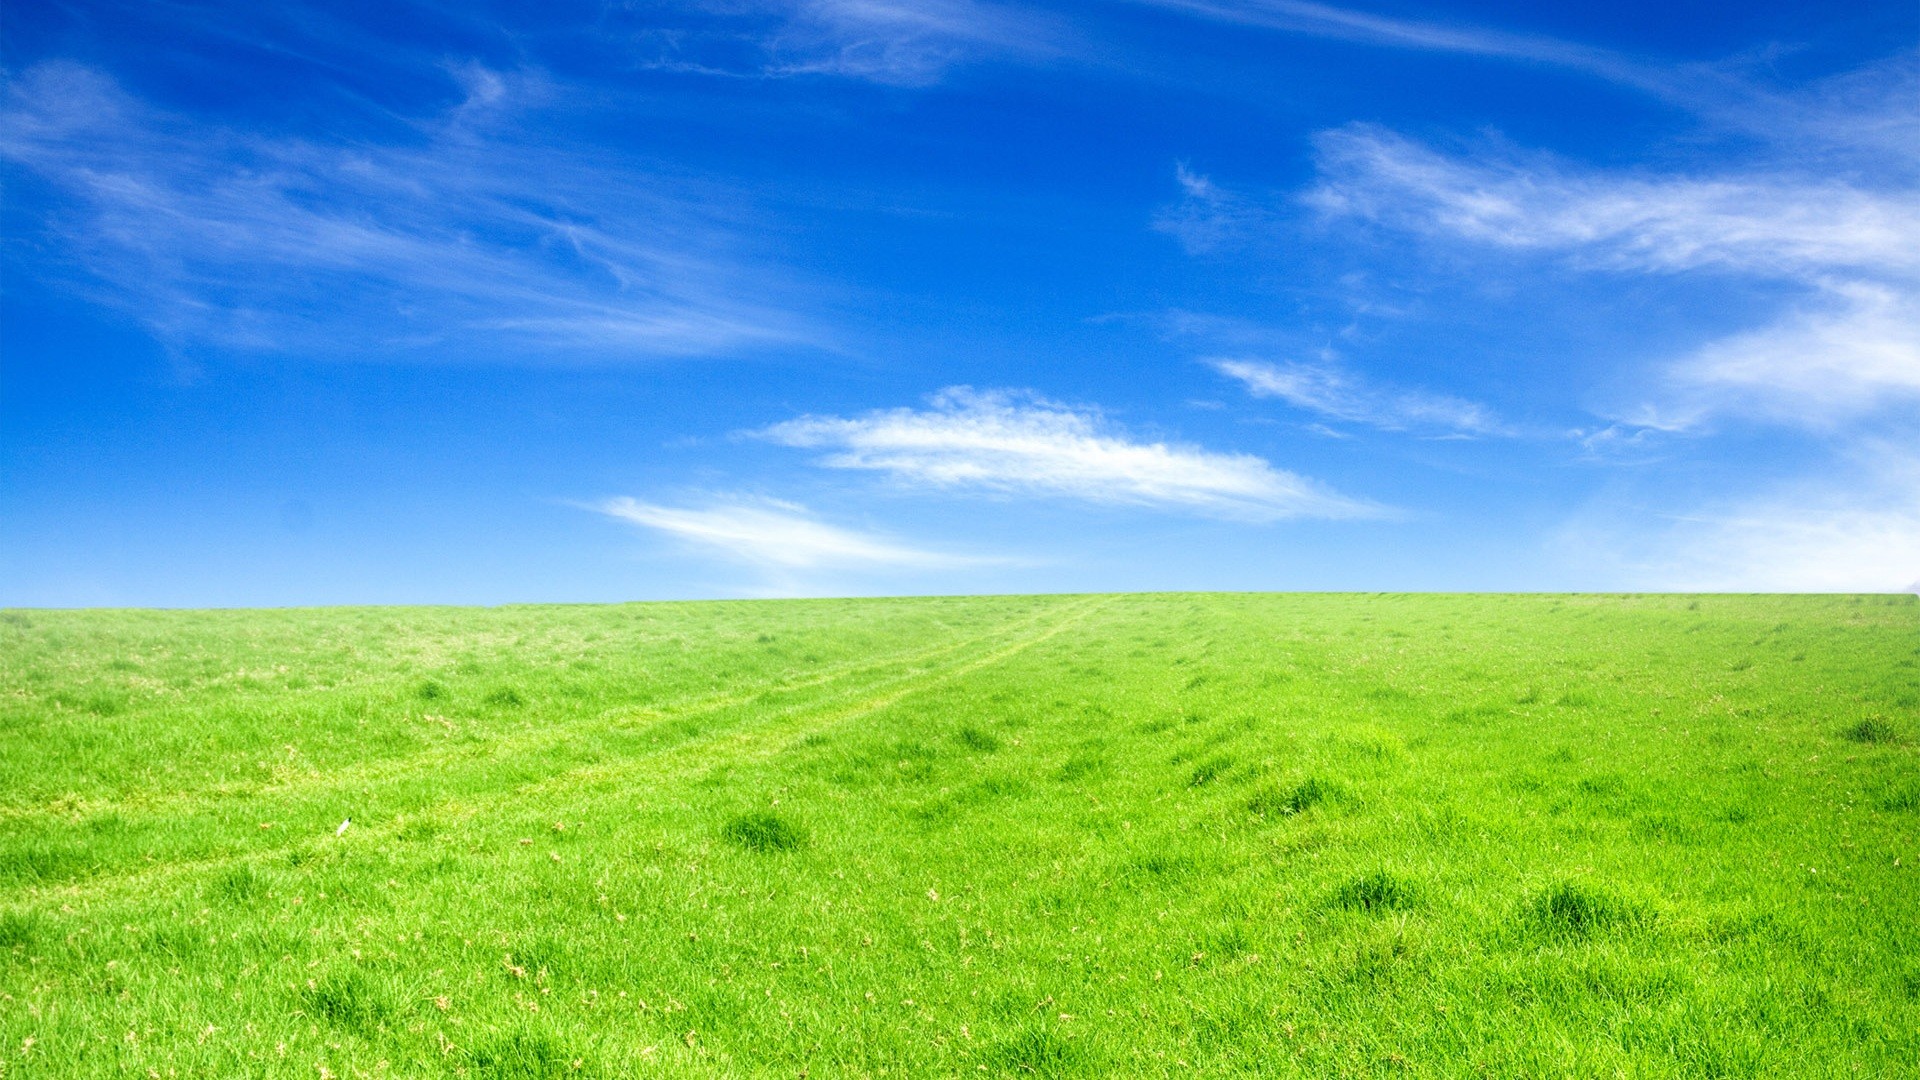 Grass and Sky Wallpaper (71+ images)